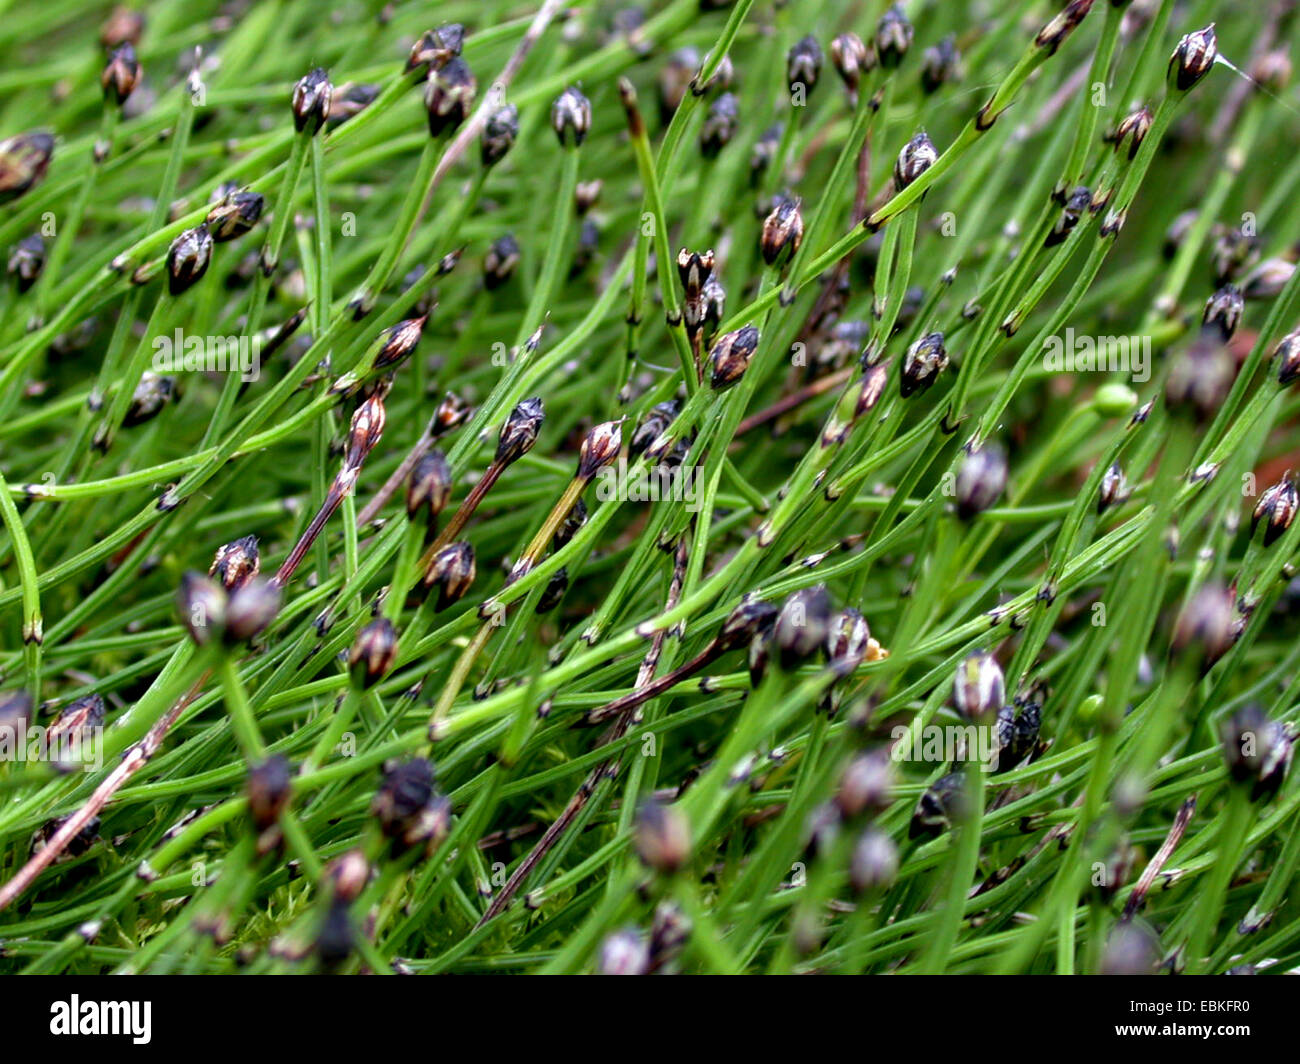 Dwarf scouring-rush, Dwarf horsetail (Equisetum scirpoides), with cones Stock Photo